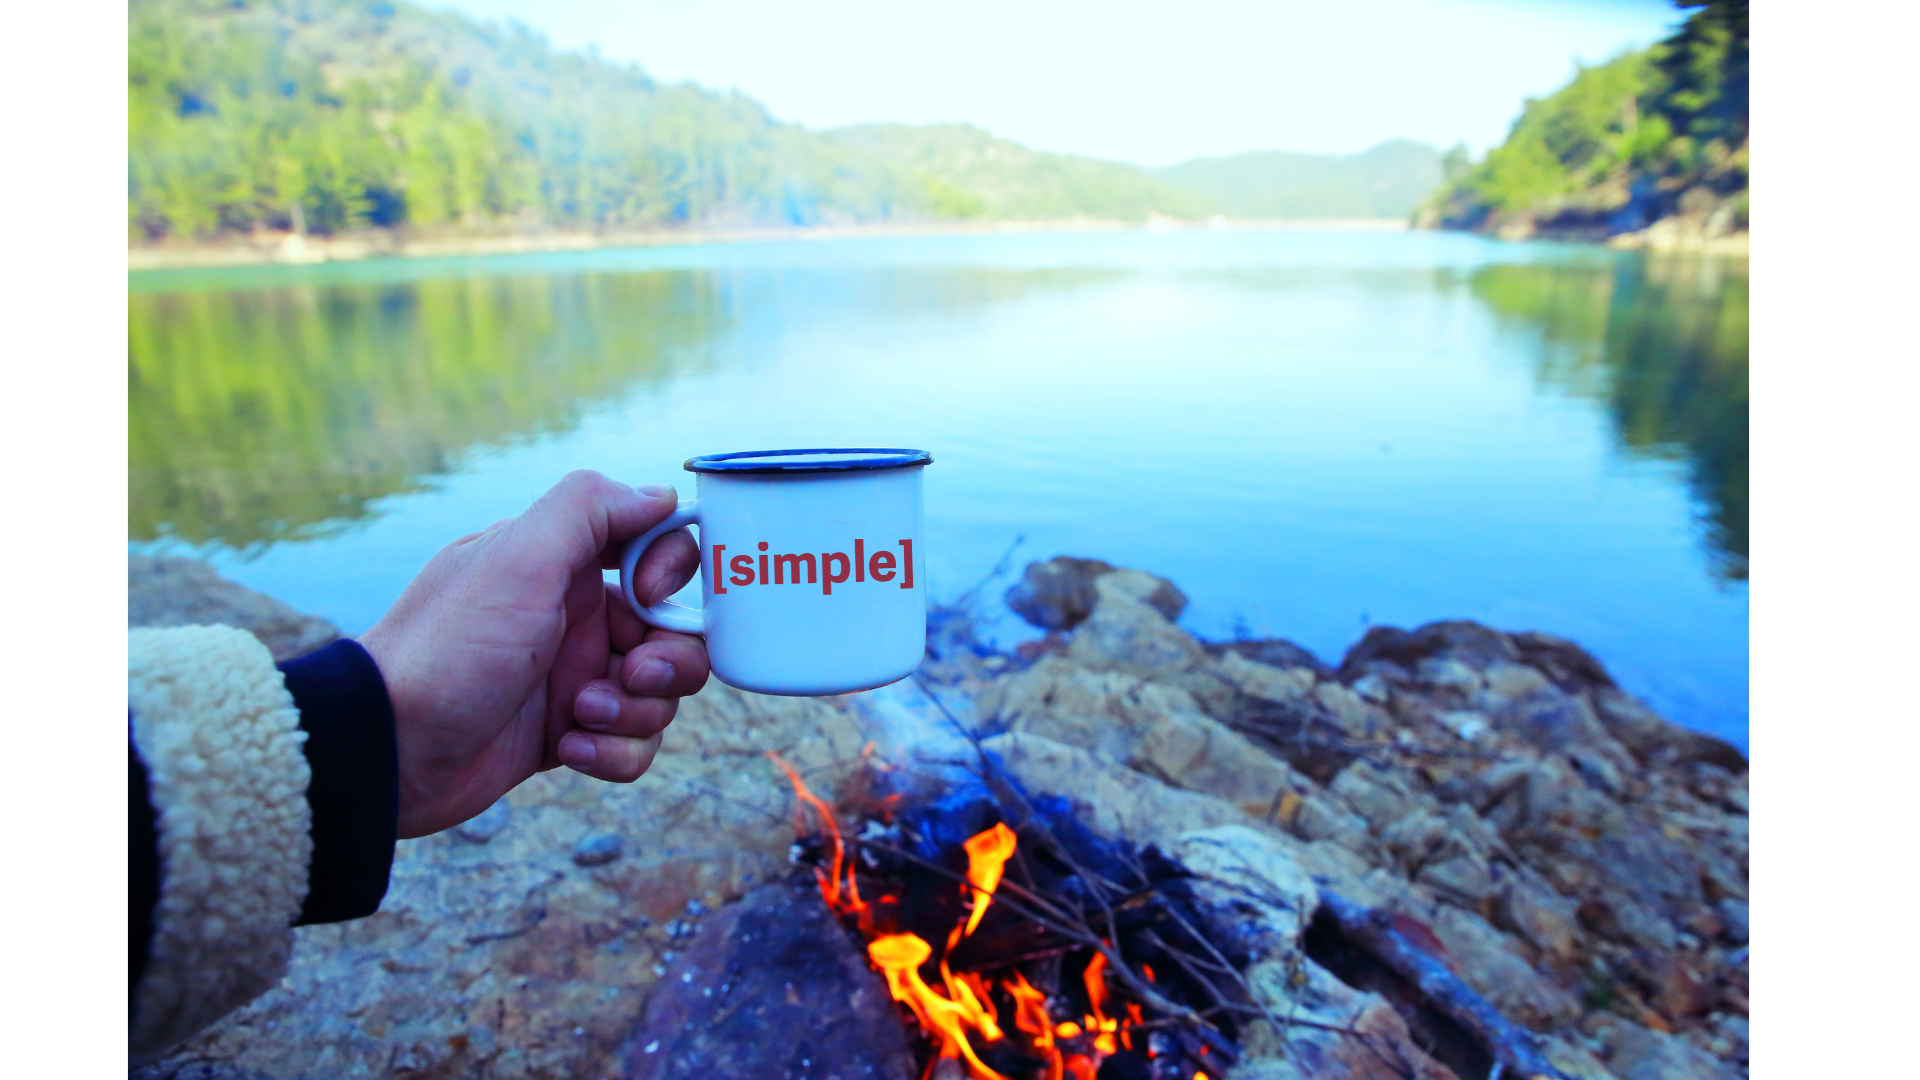 Bonfire and STS coffee mug, overlooking a body of water.